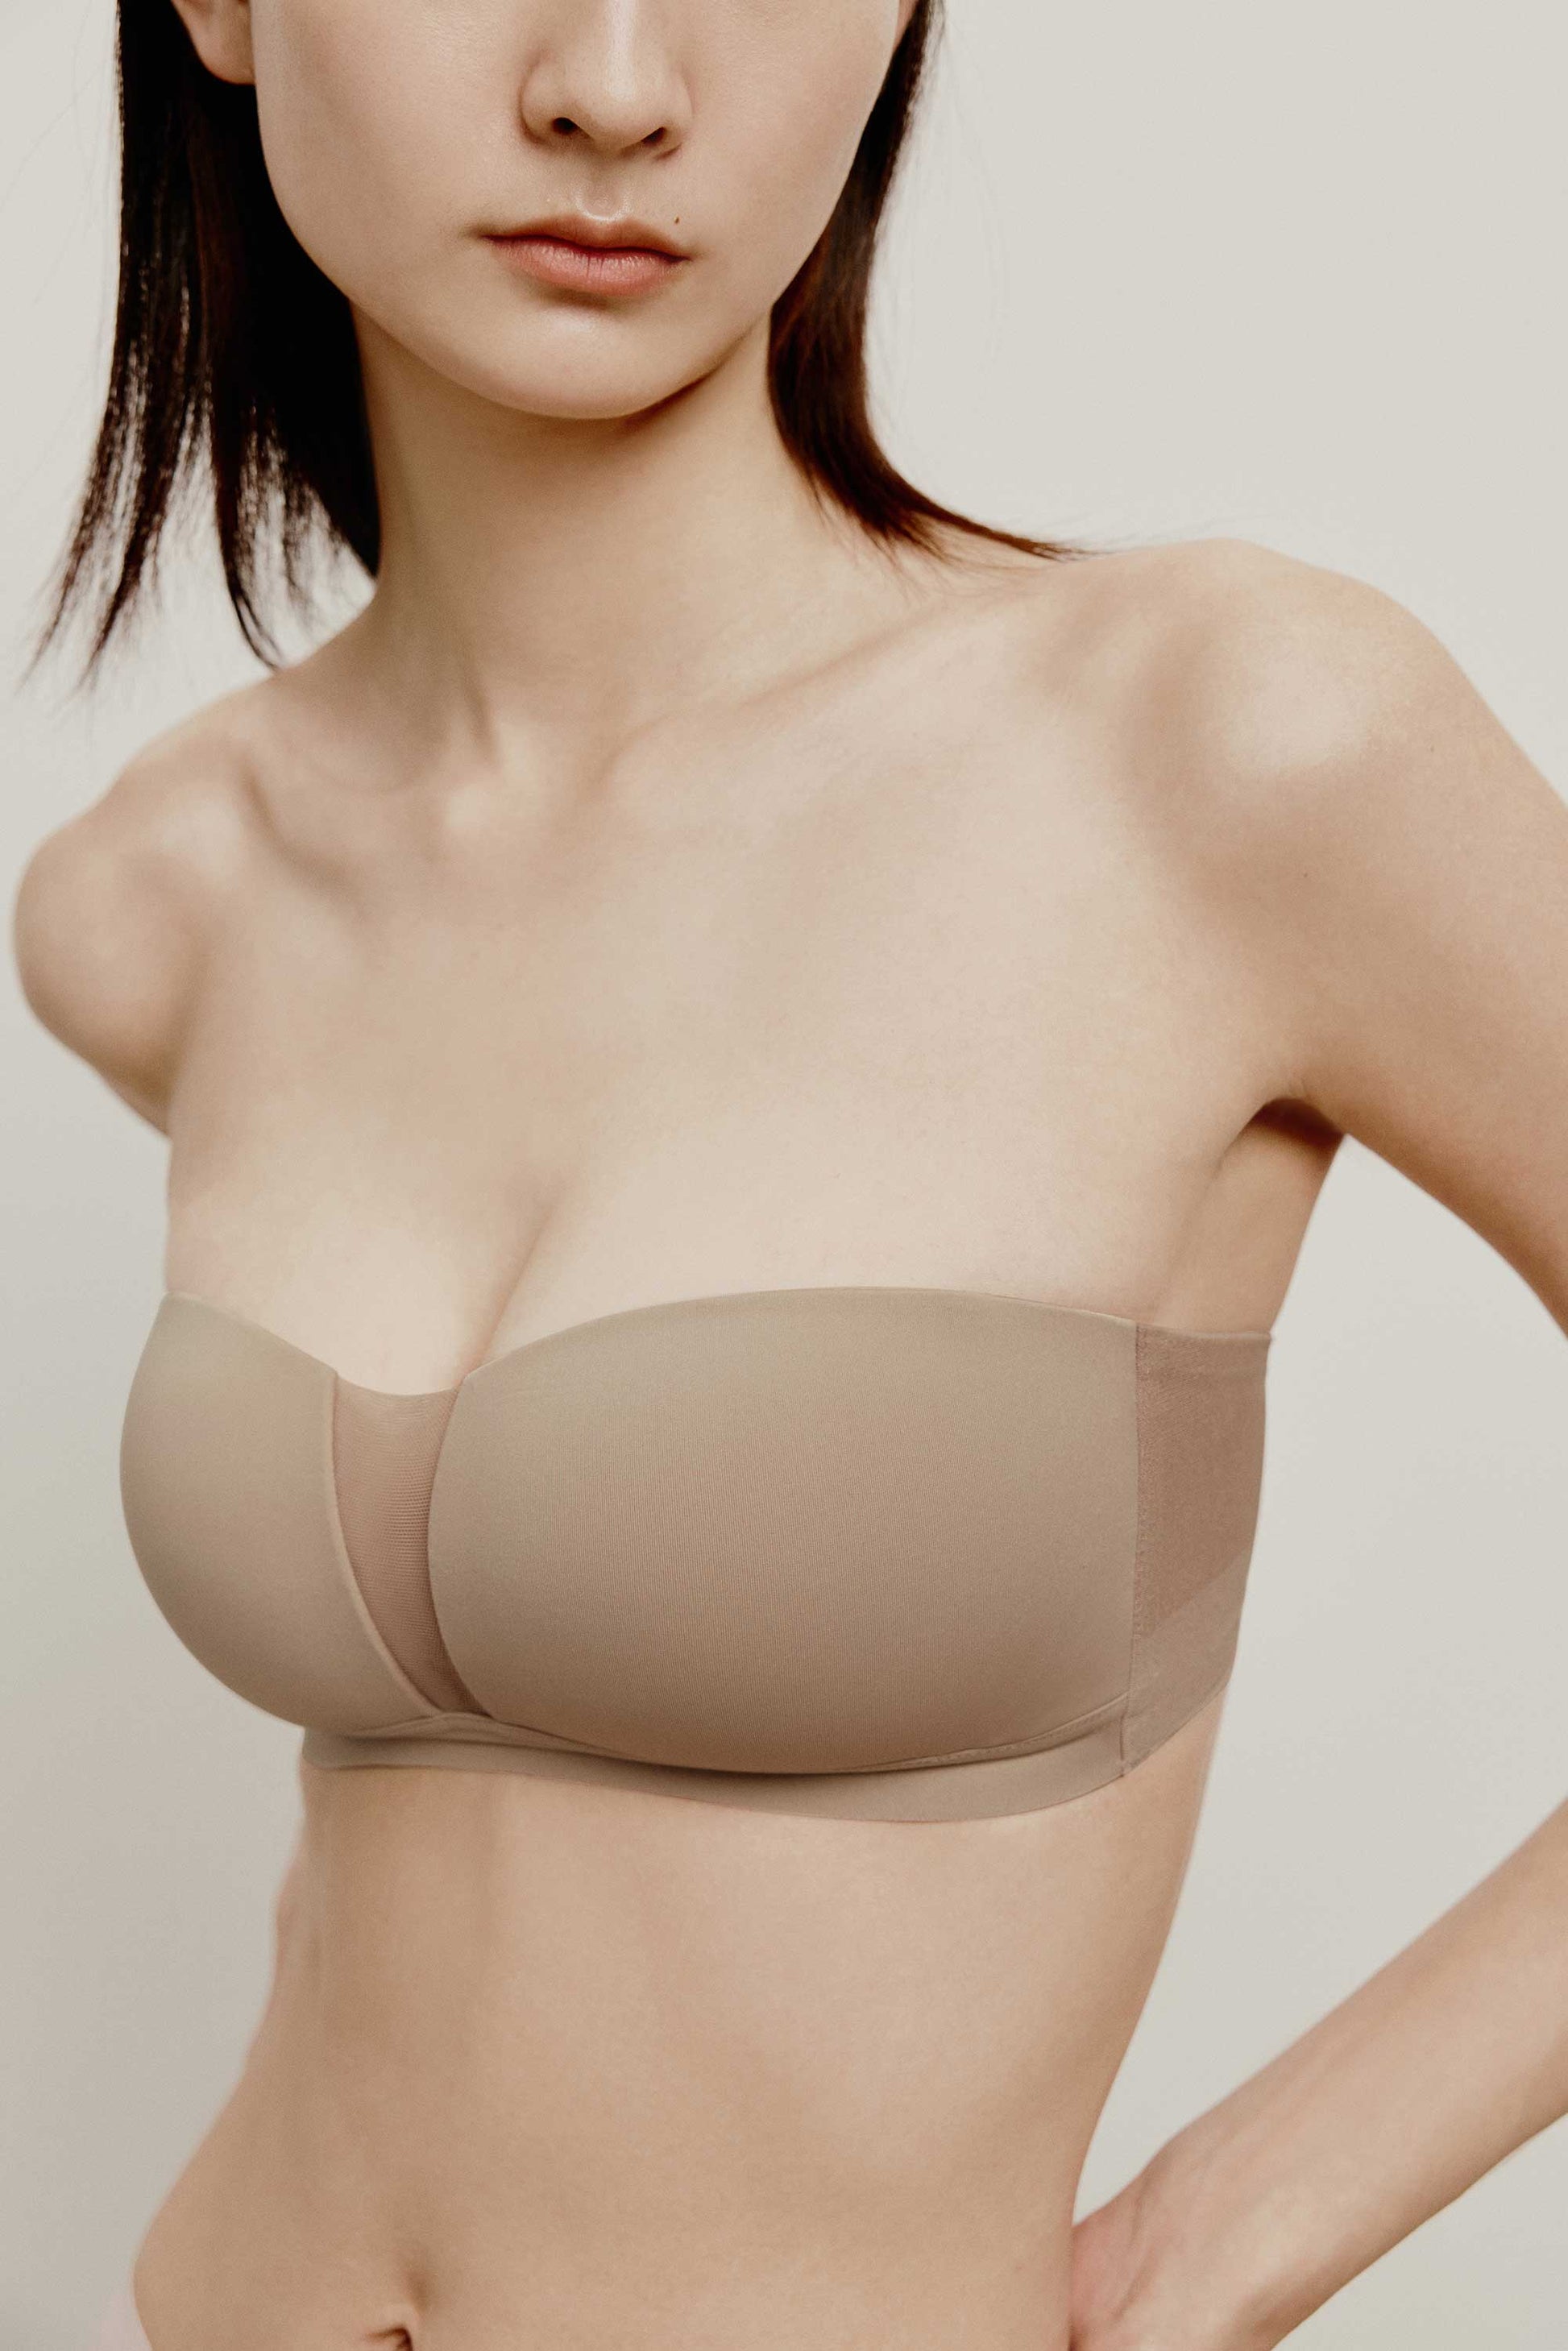 NY Lingerie Womens Everyday Basic Strapless Bandeau Bra, One Size, Limpet  Shell